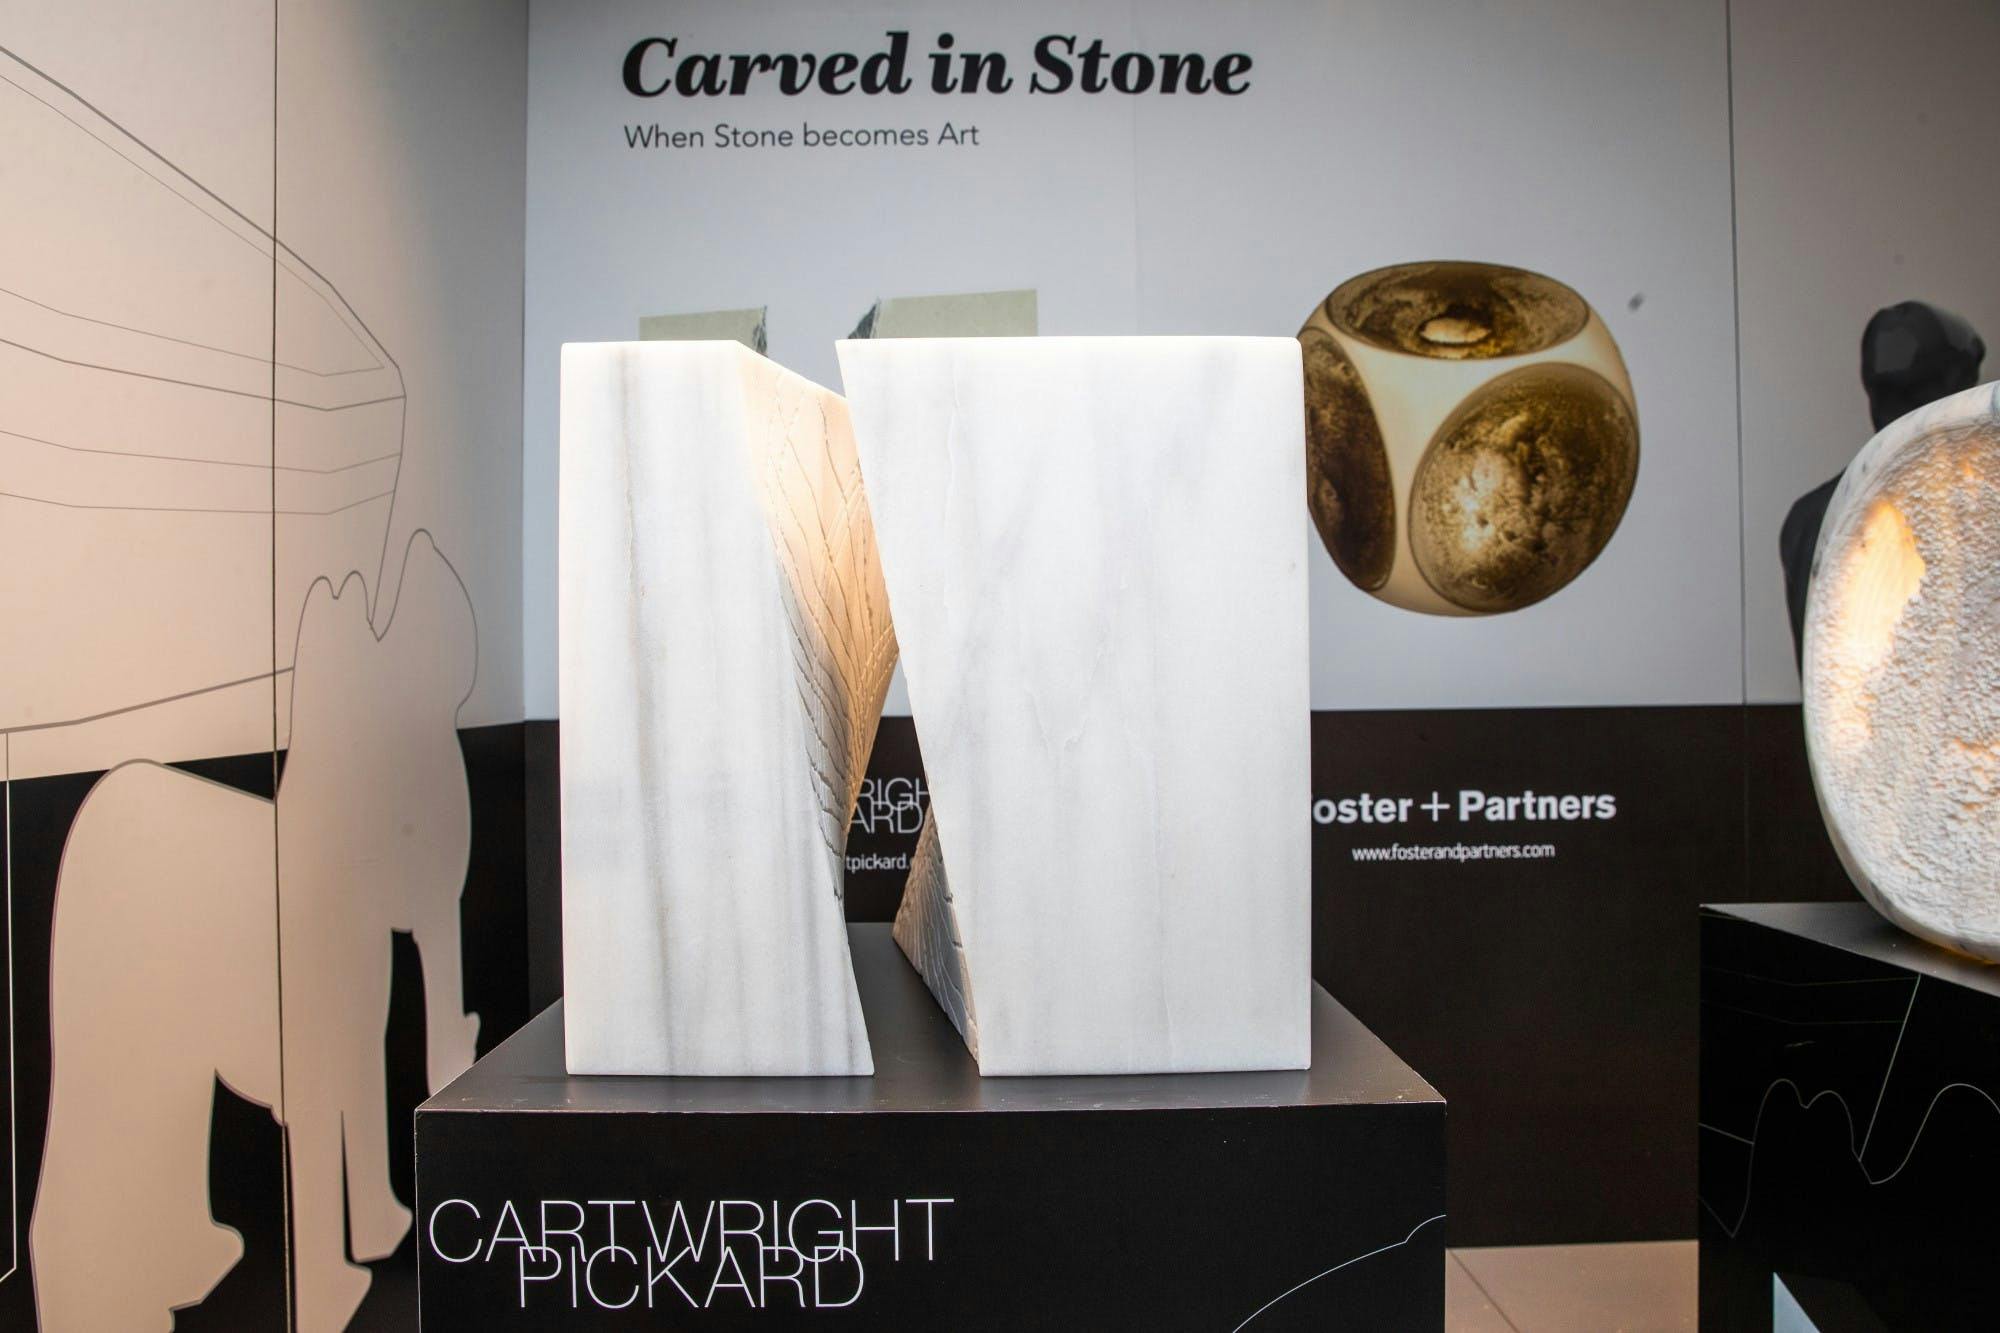 Image 34 of Cartwright Pickard Sculpture 4 in Cosentino Announces the Winners of its Carved in Stone Competition - Cosentino